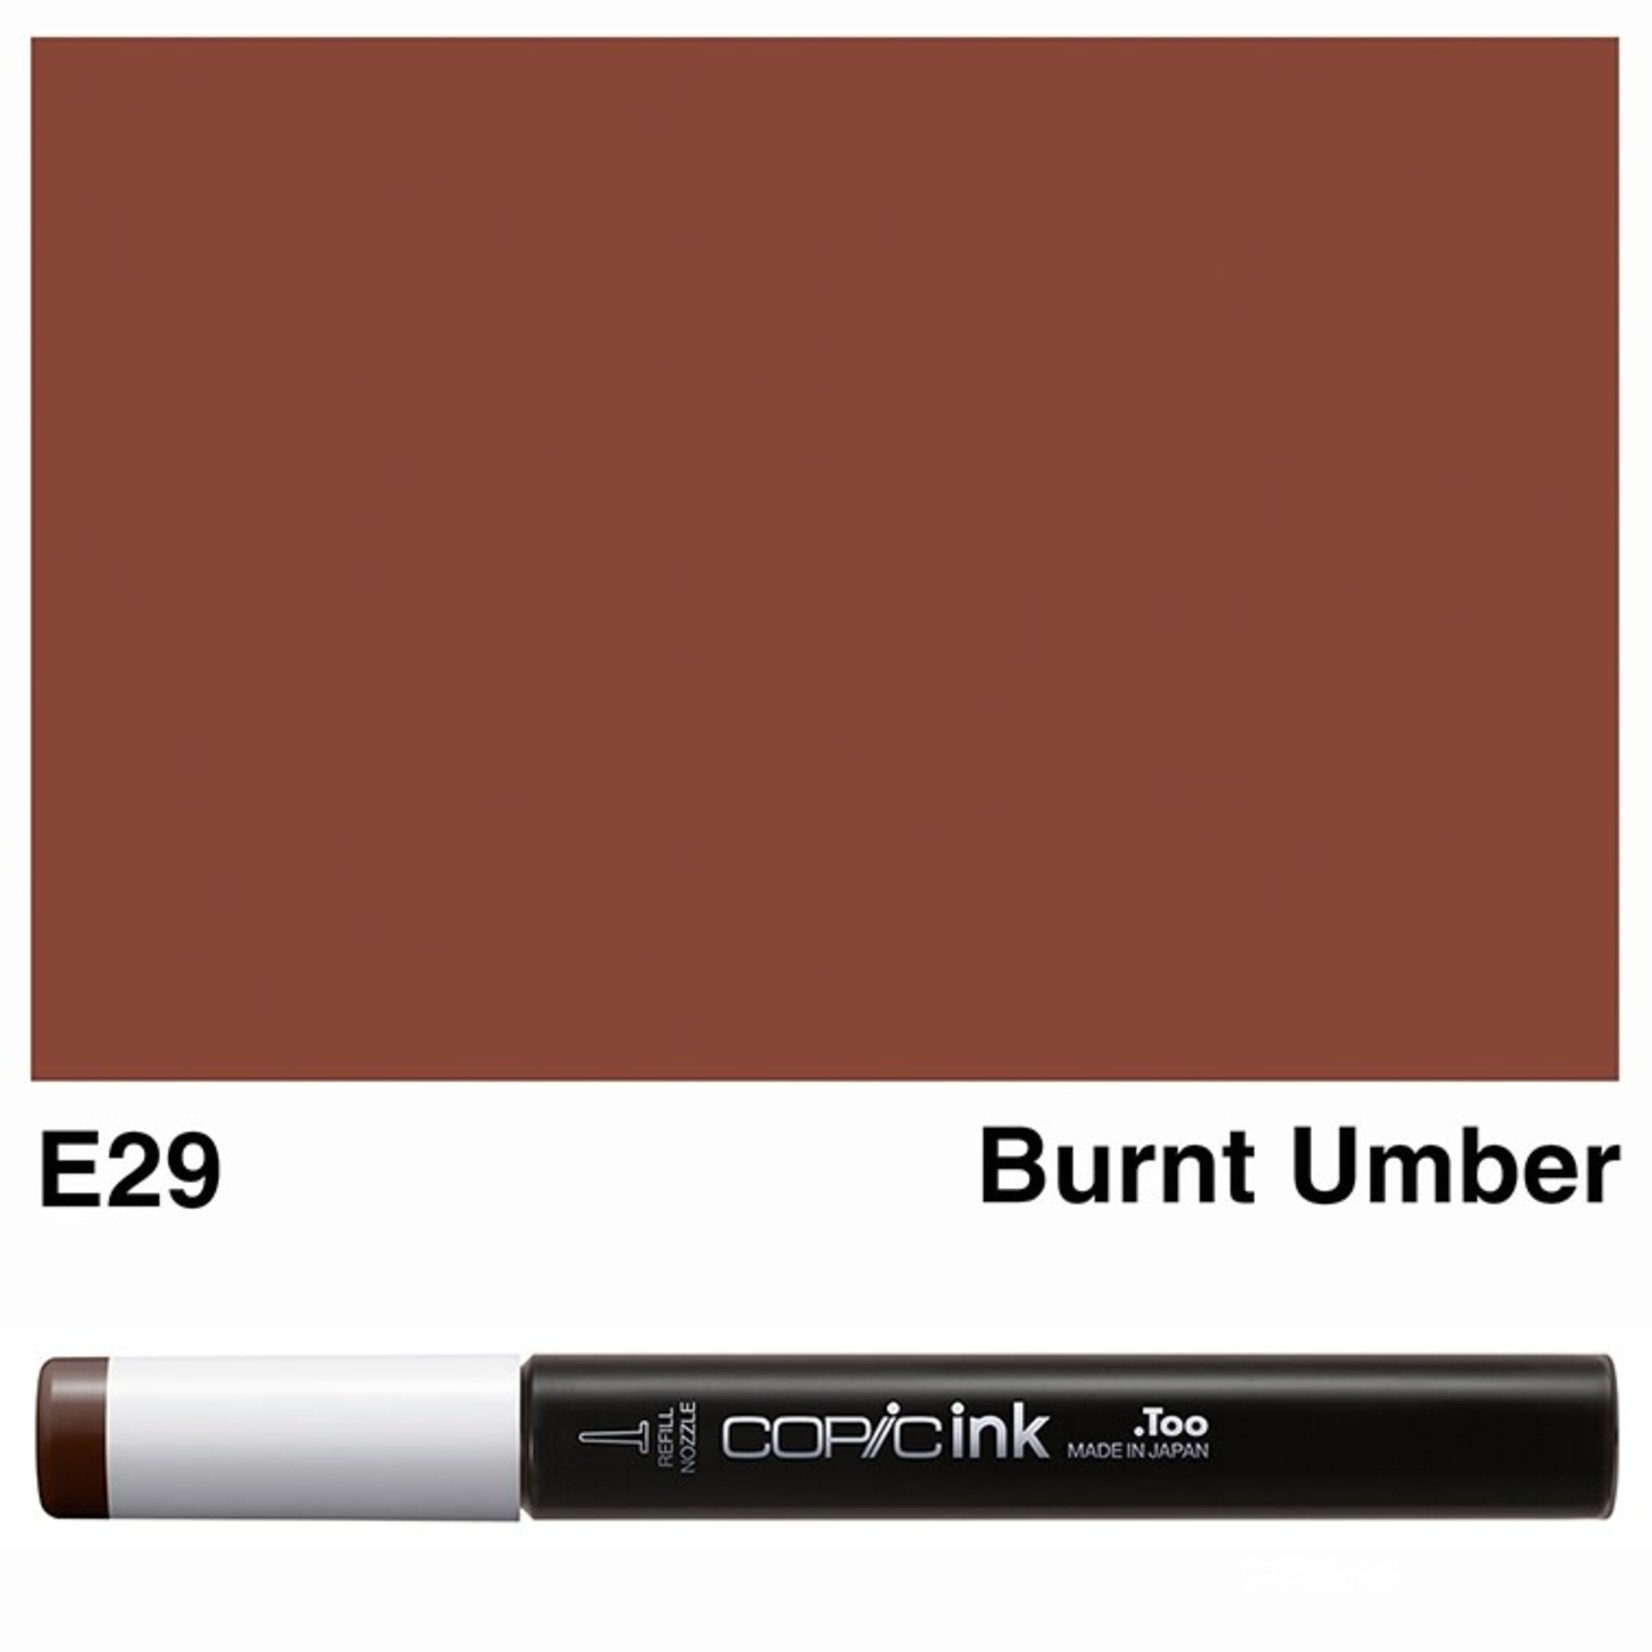 Copic Copic Various Ink E29 Burnt Umber